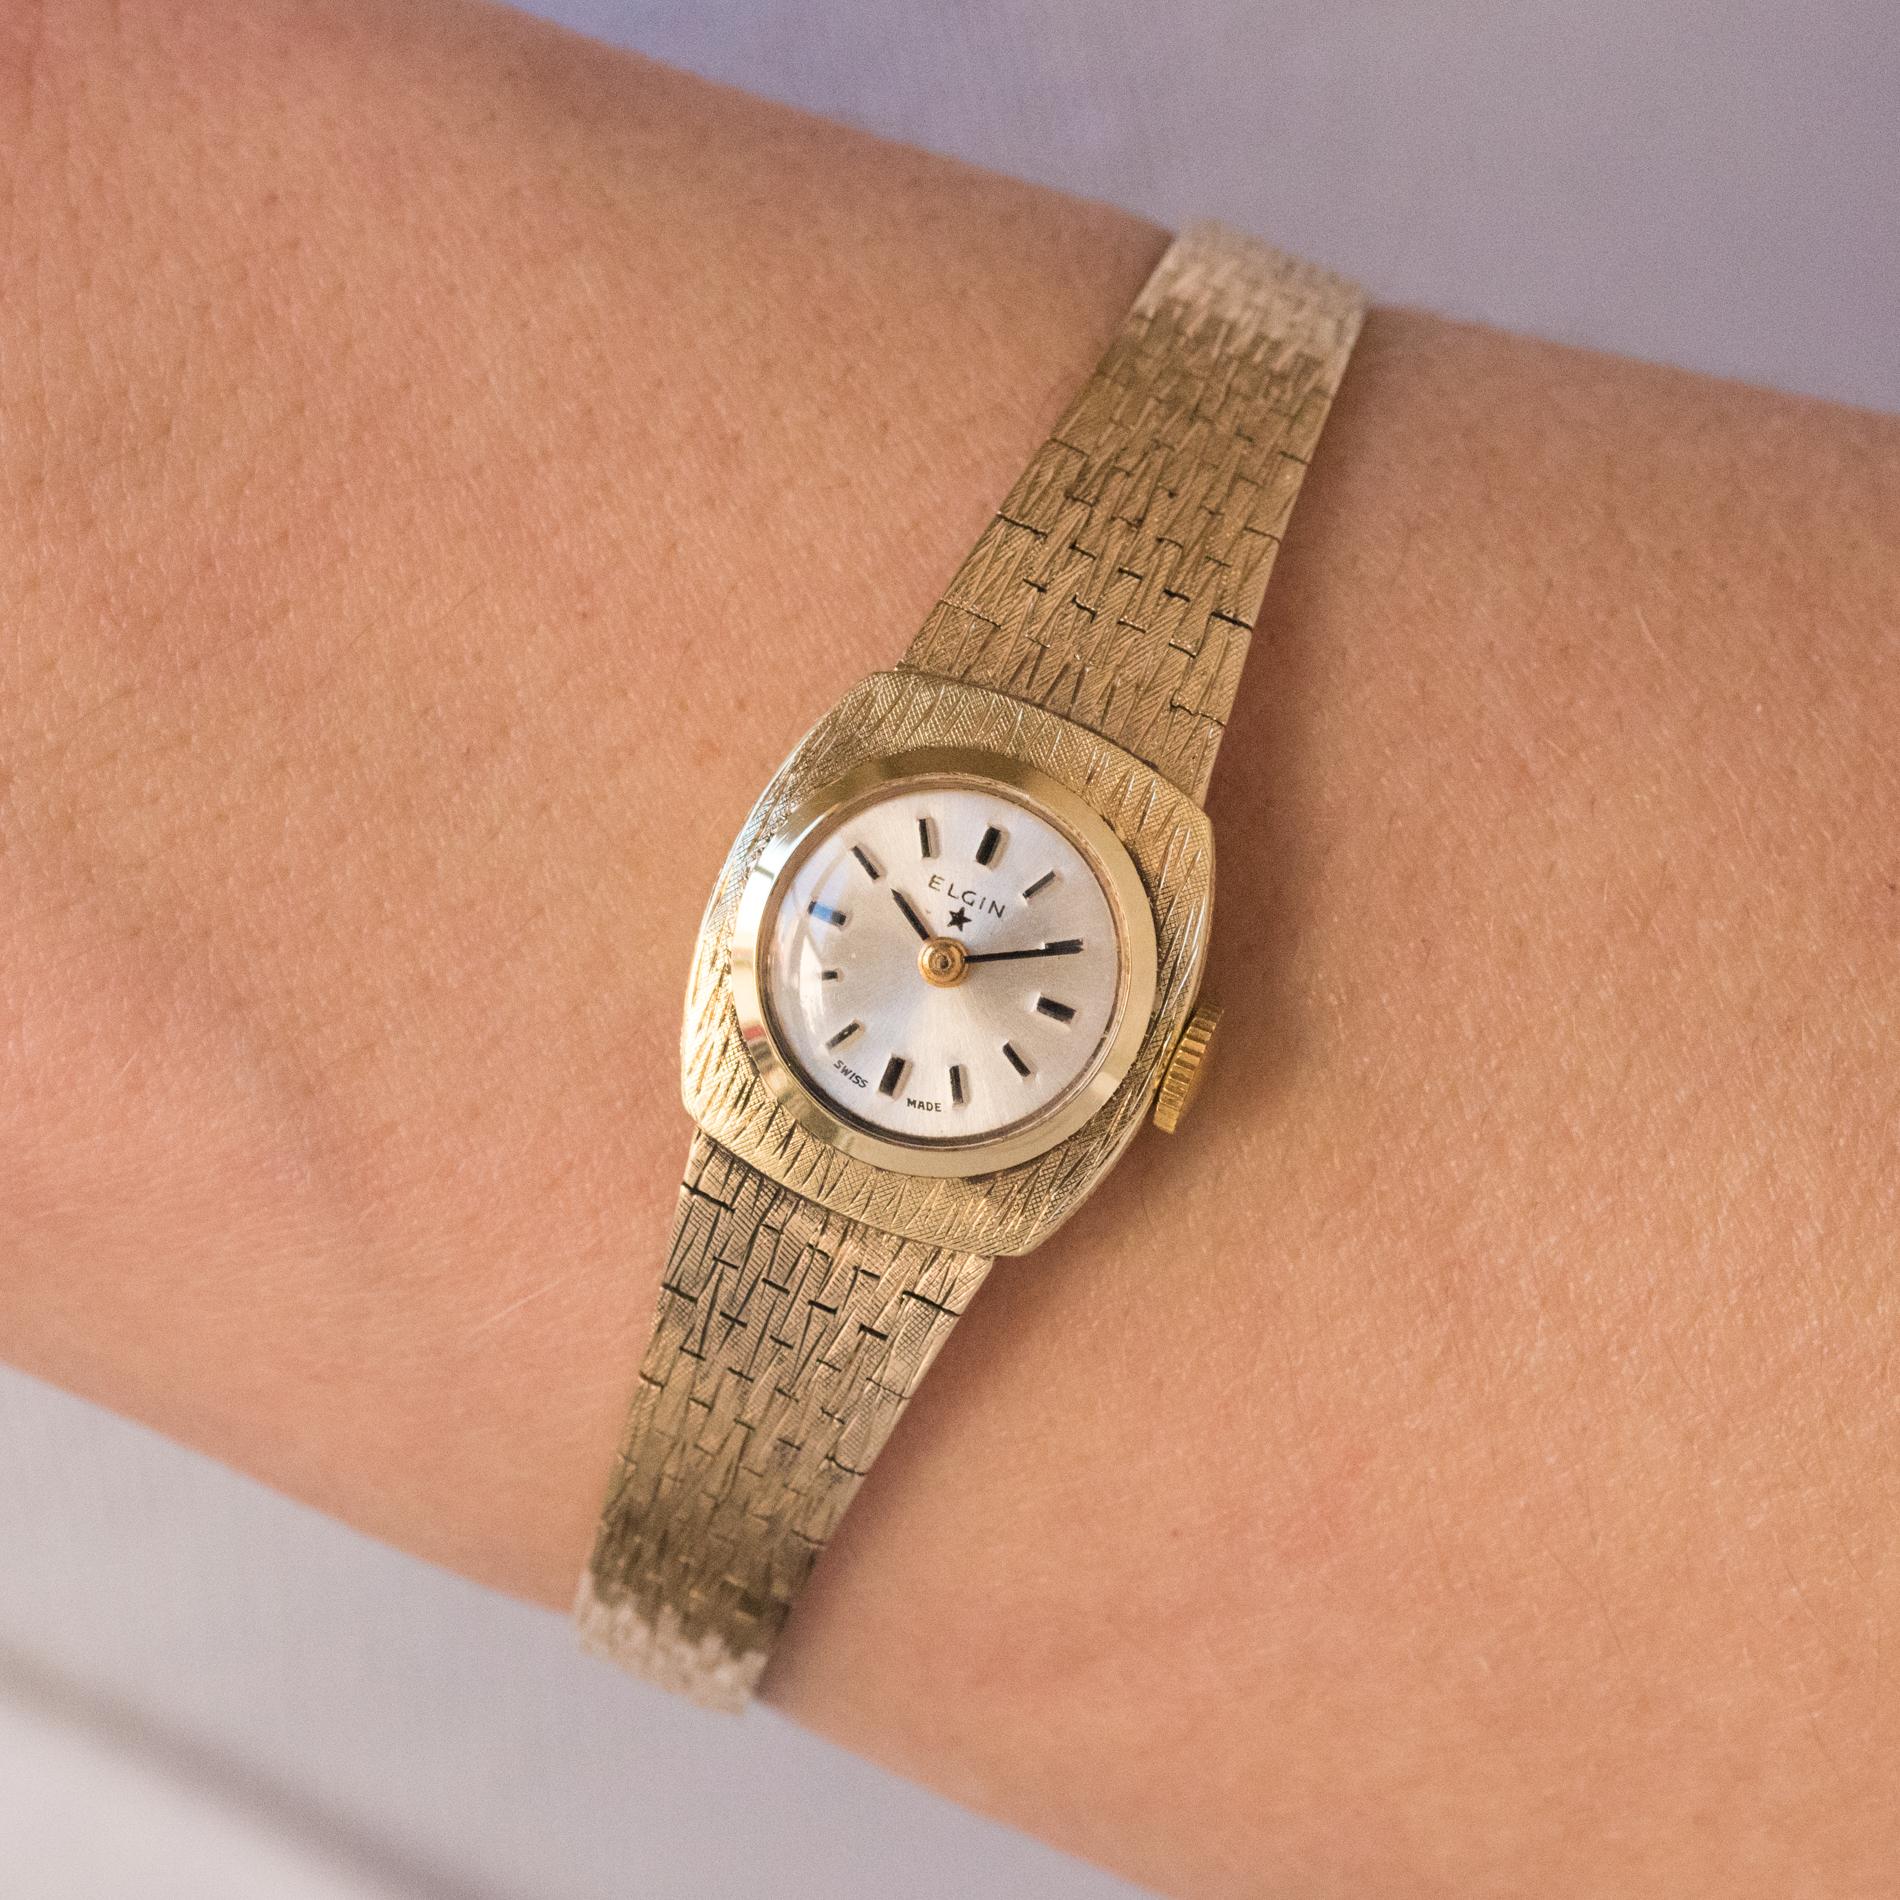 Watch and its bracelet in 14 karats yellow gold.
Elgin ladies watch.
Square case in 18 karats yellow gold.
Perfect working condition - Very good condition and overall appearance.
Mechanical watch with manual winding.
Pearl gray background.
Bracelet